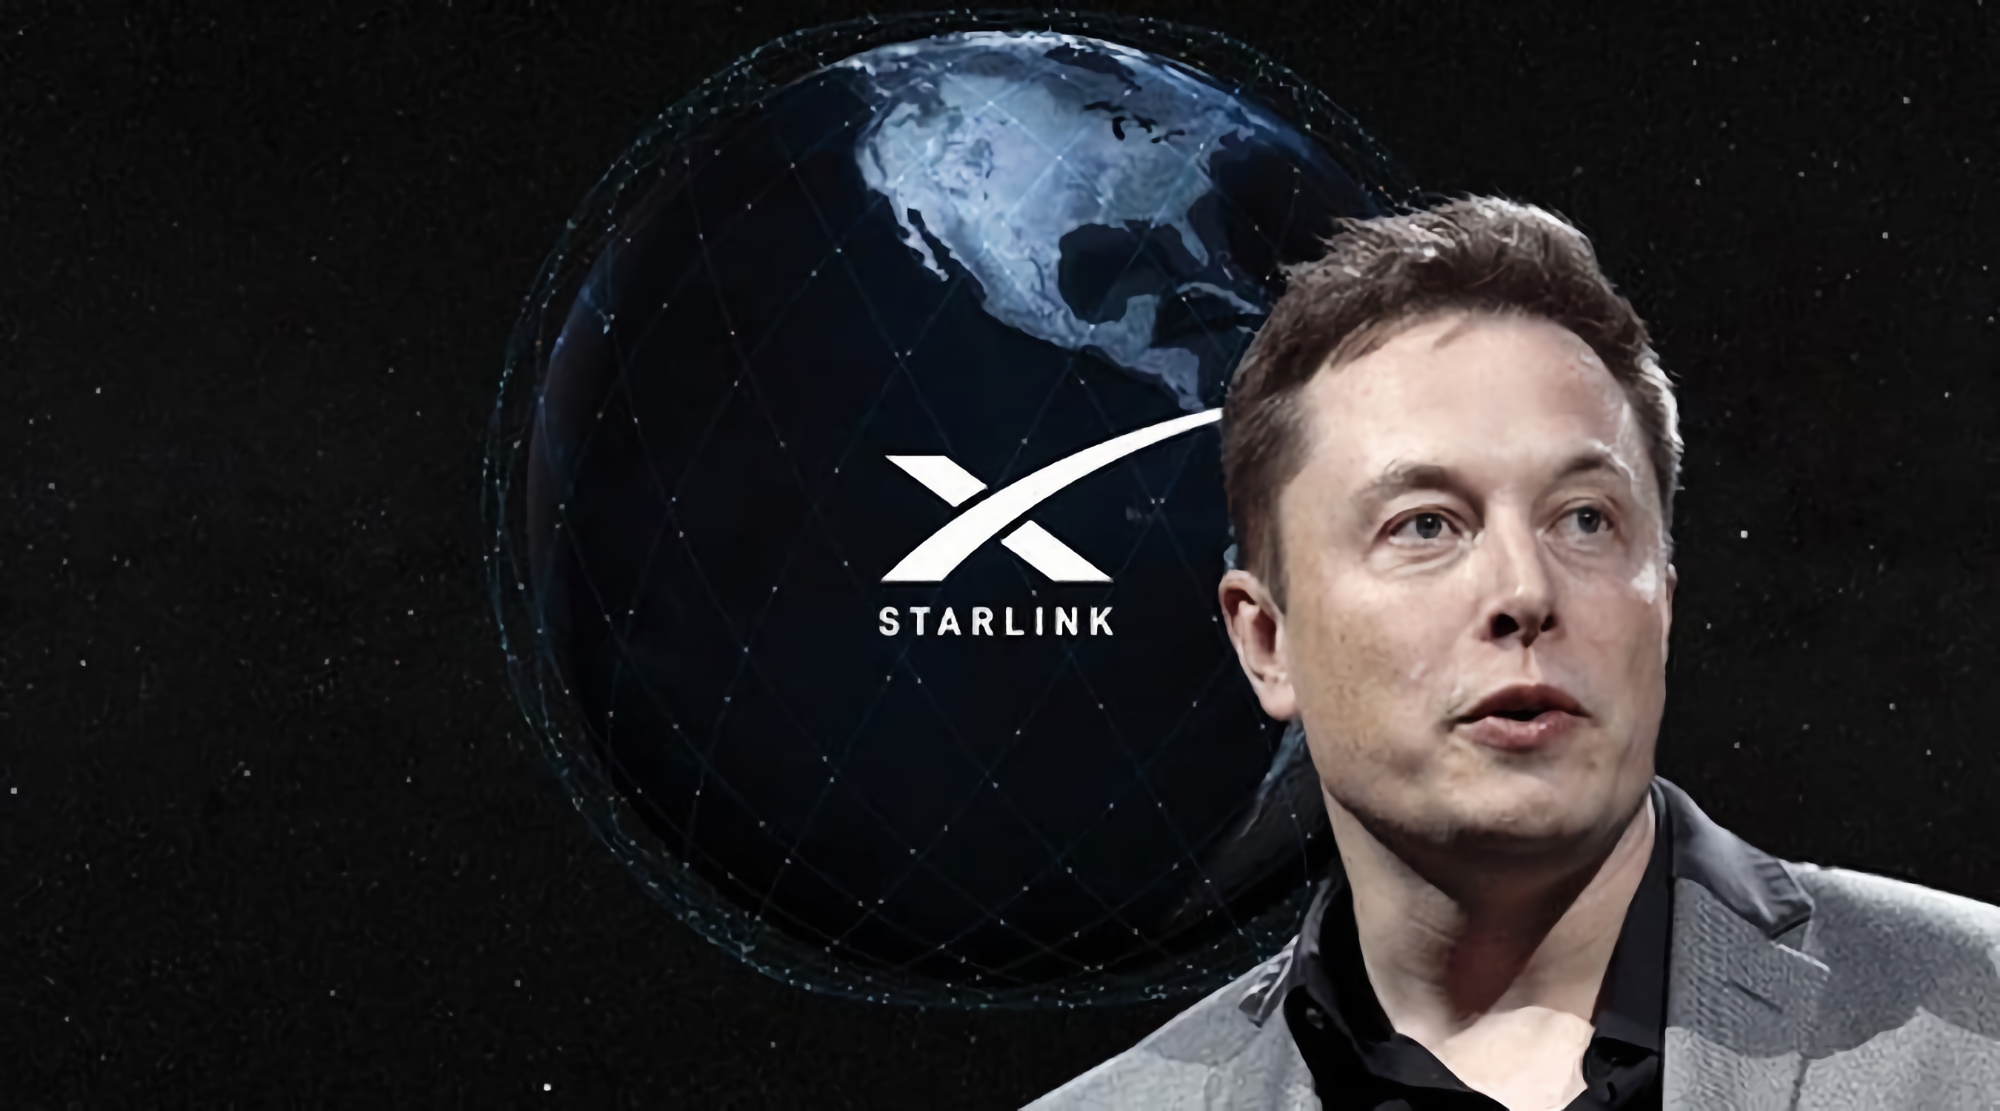 "The hell with it": Musk will continue to fund Starlink communications in Ukraine